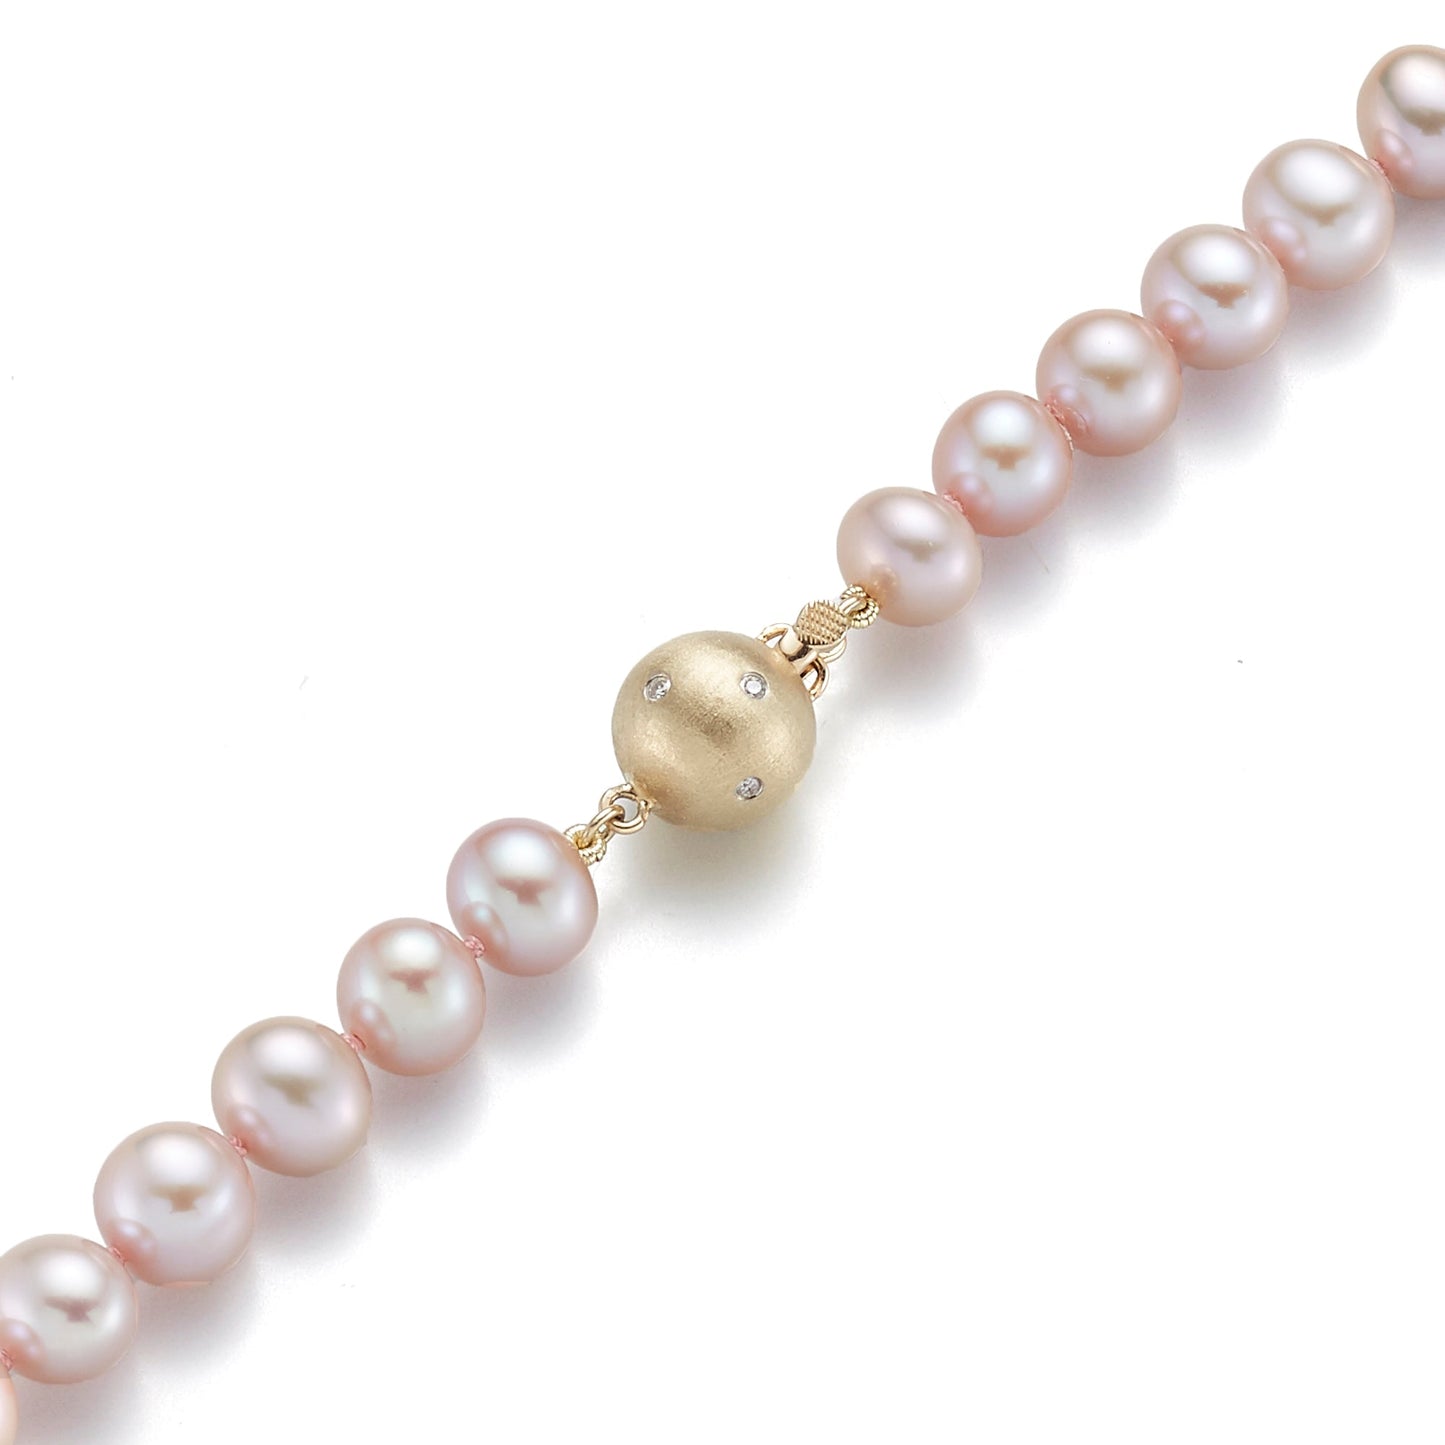 7mm Pink Pearl Necklace